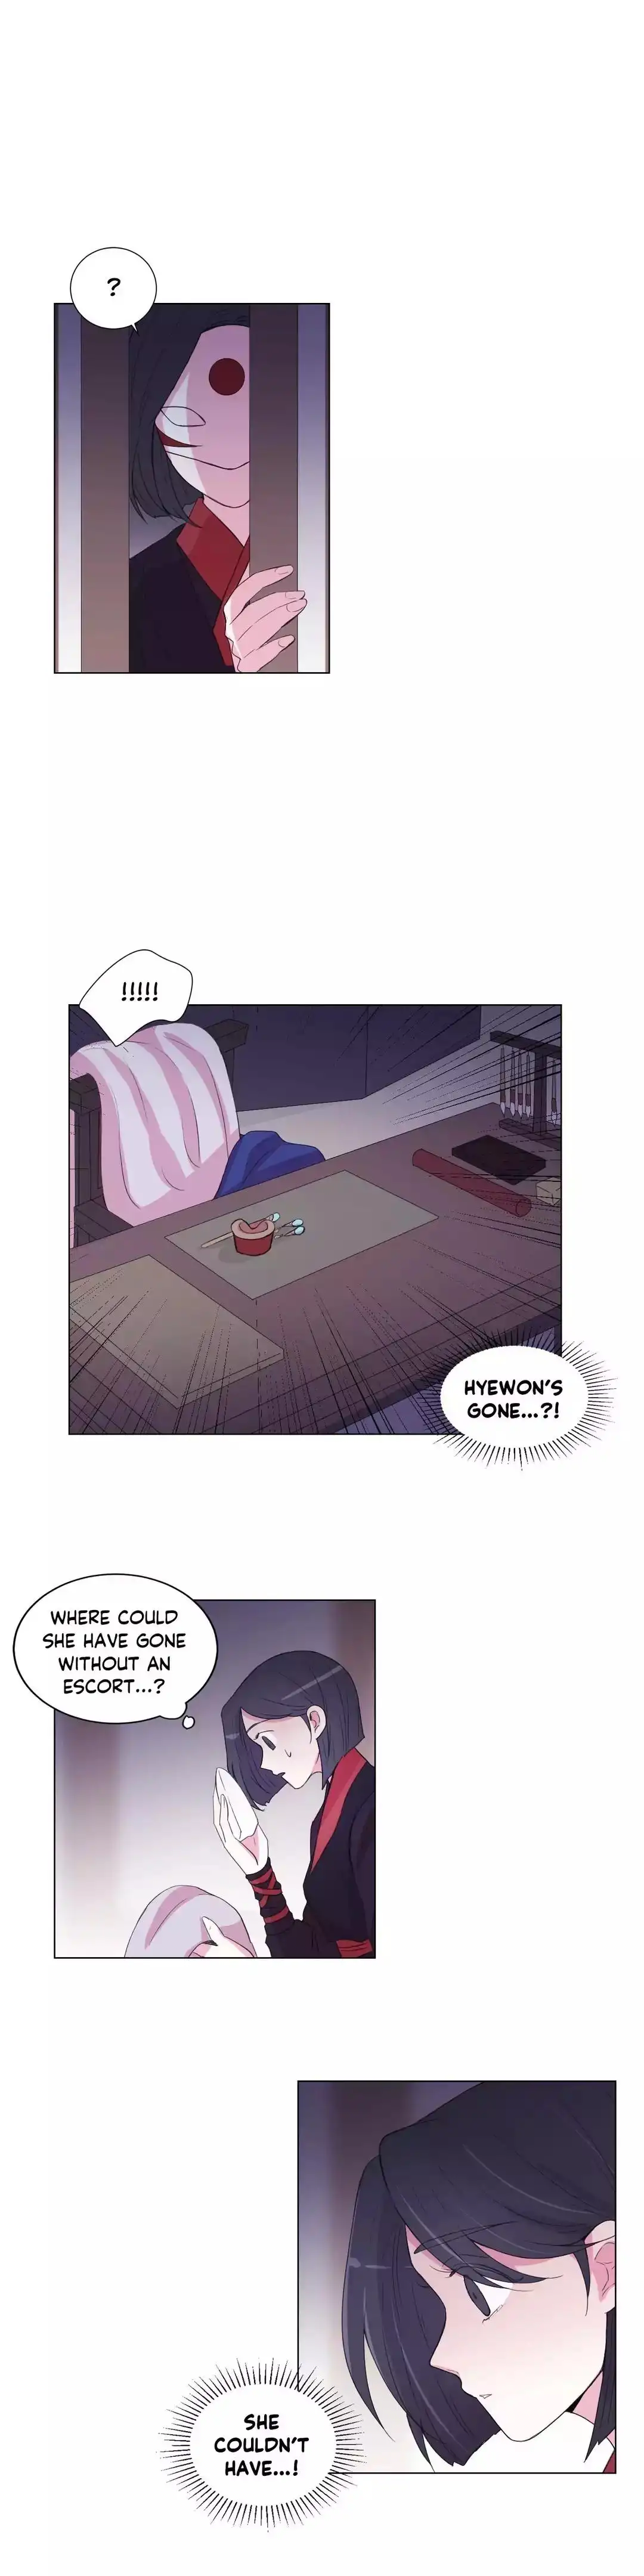 Moonlight Garden - Chapter 62 Page 9